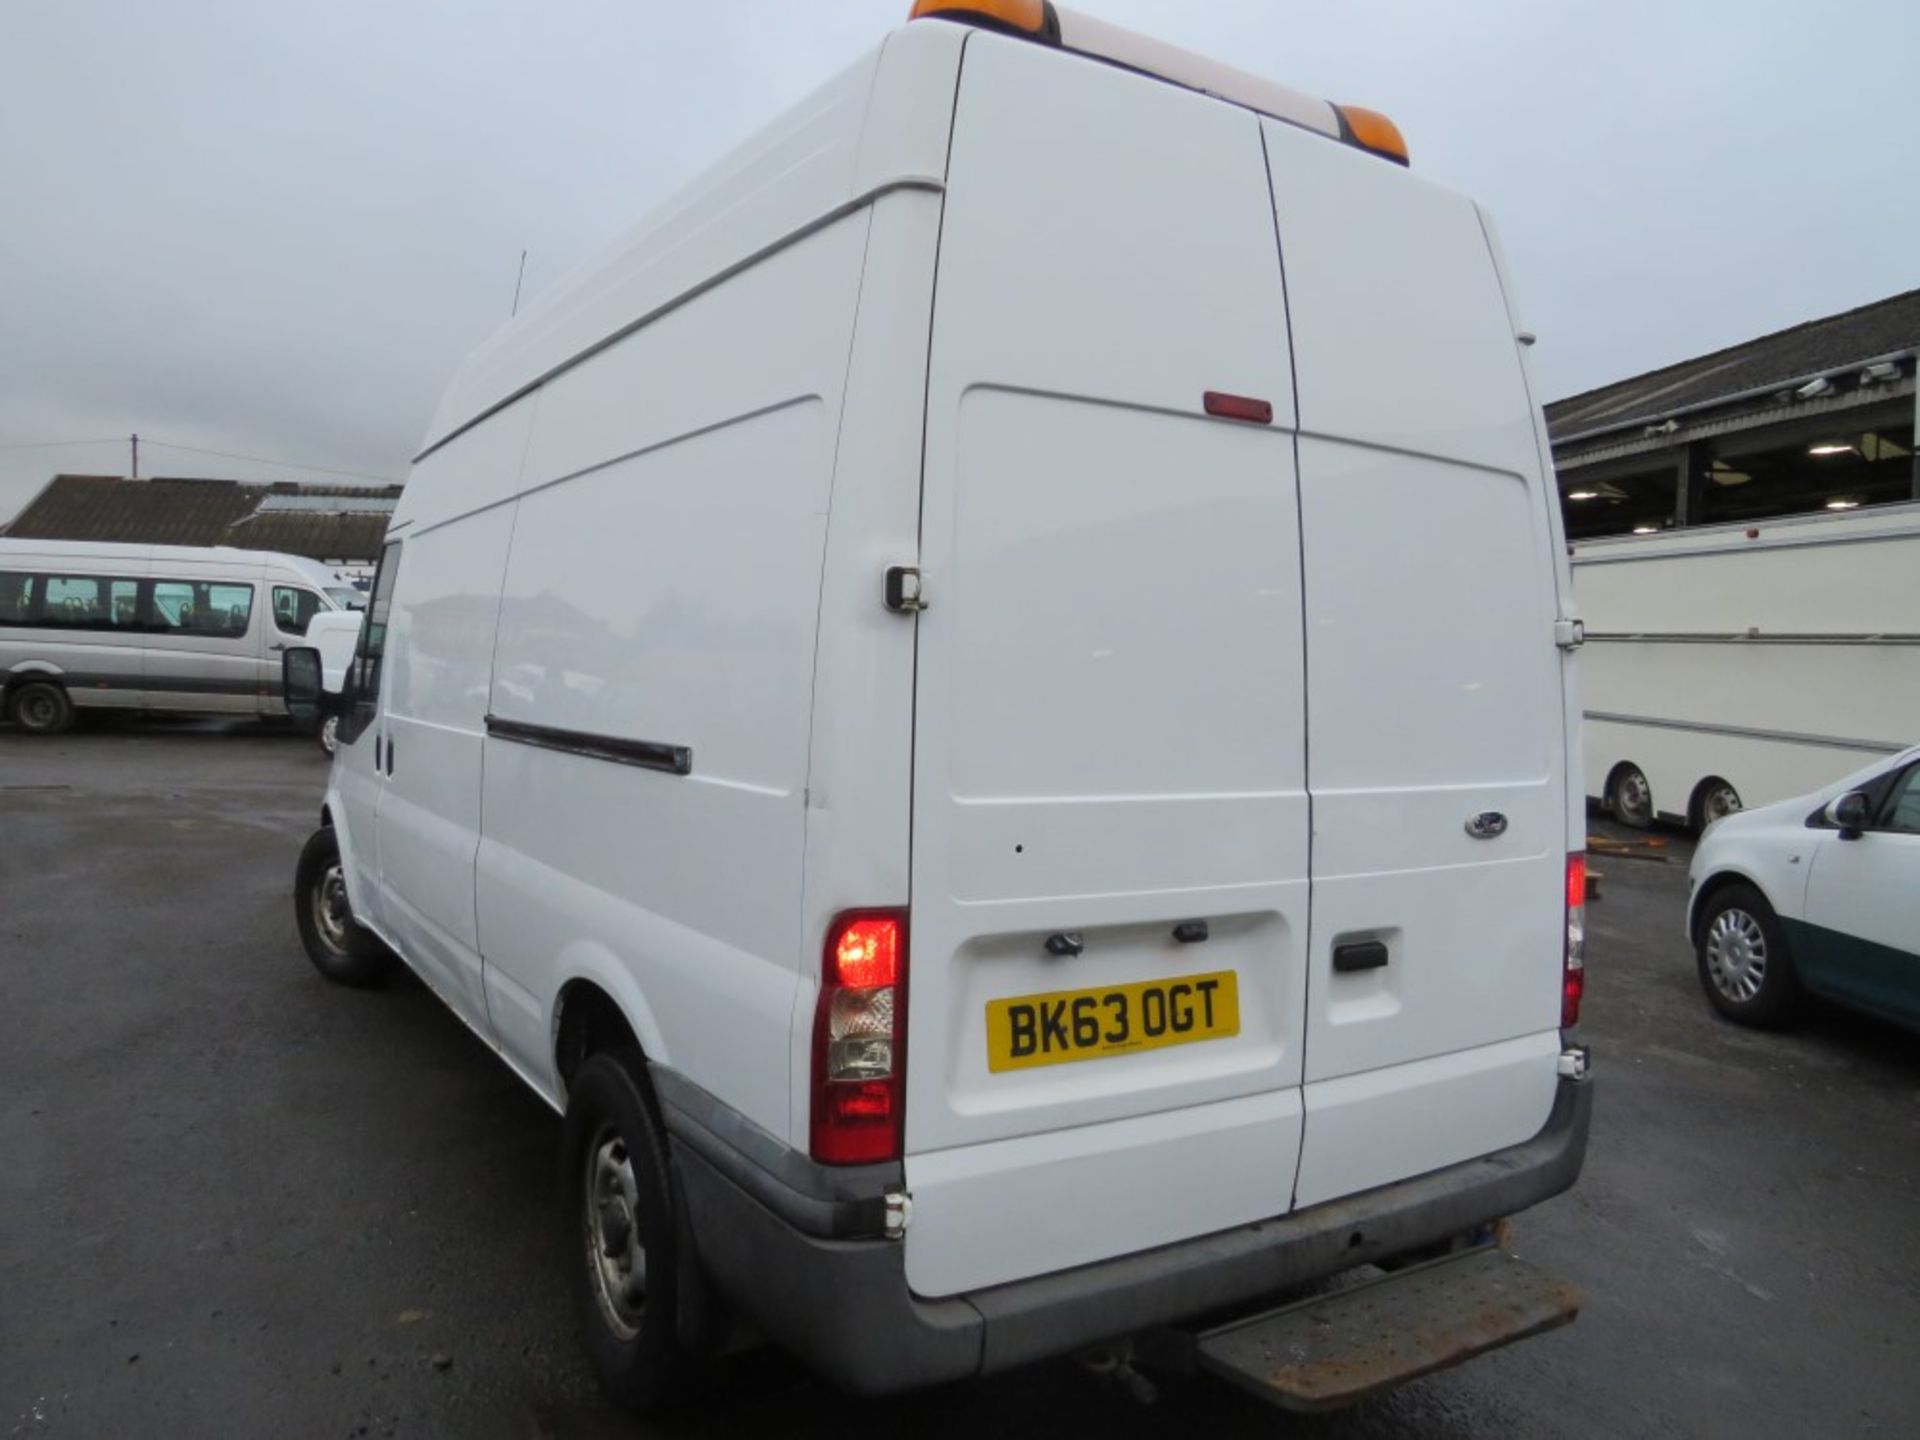 63 reg FORD TRANSIT 125 T350 RWD, 1ST REG 09/13, TEST 11/20, 72256M WARRANTED, V5 HERE, 1 OWNER FROM - Image 3 of 6